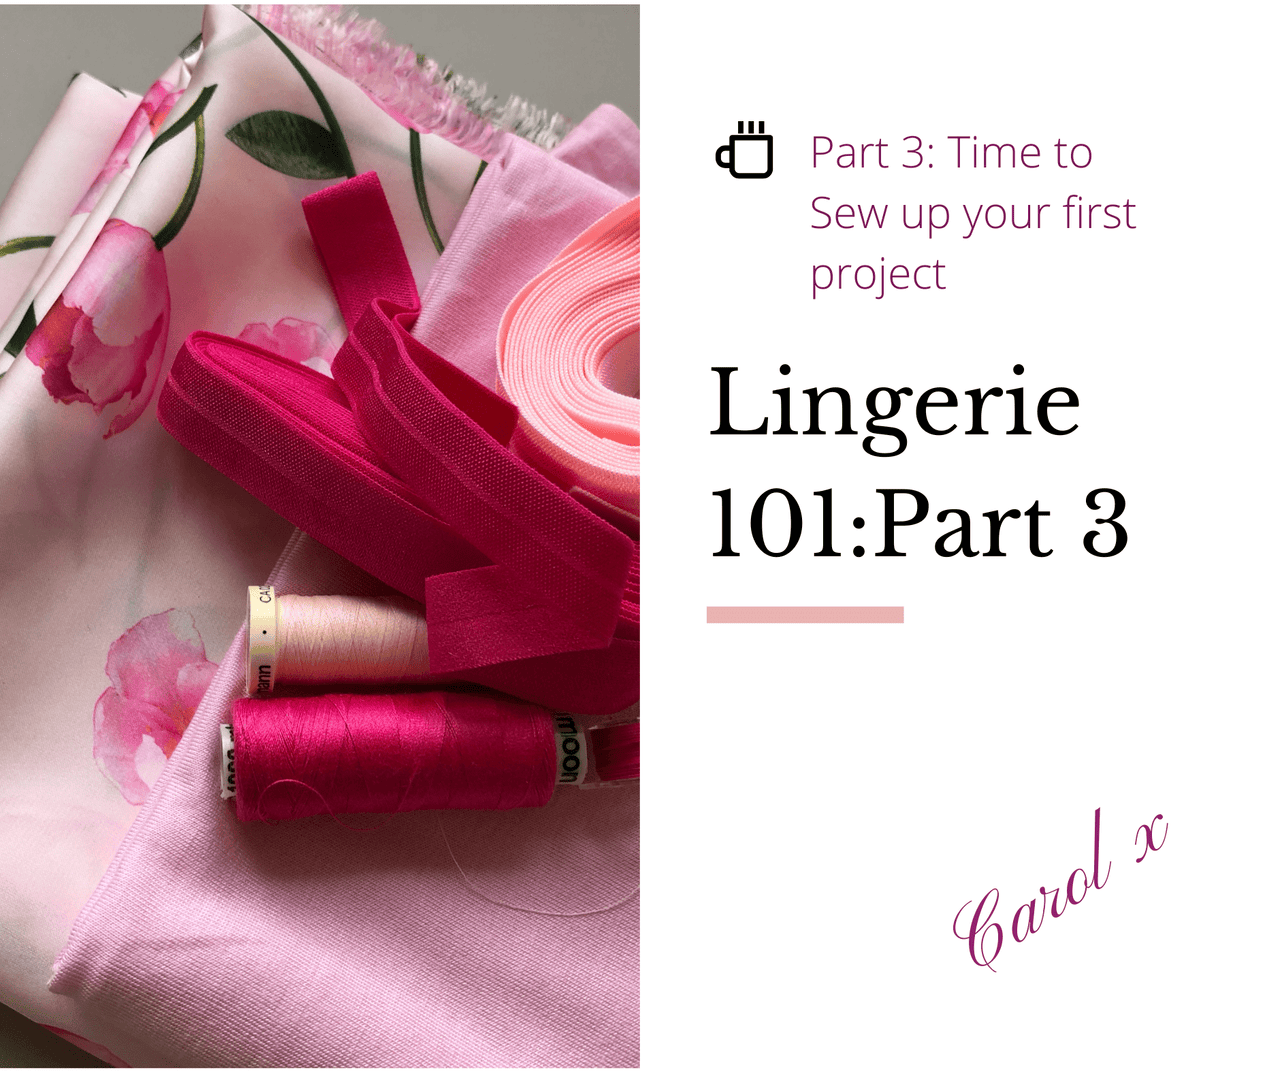 Lingerie 101 - Part 3: Finally time to sew - Fabriques